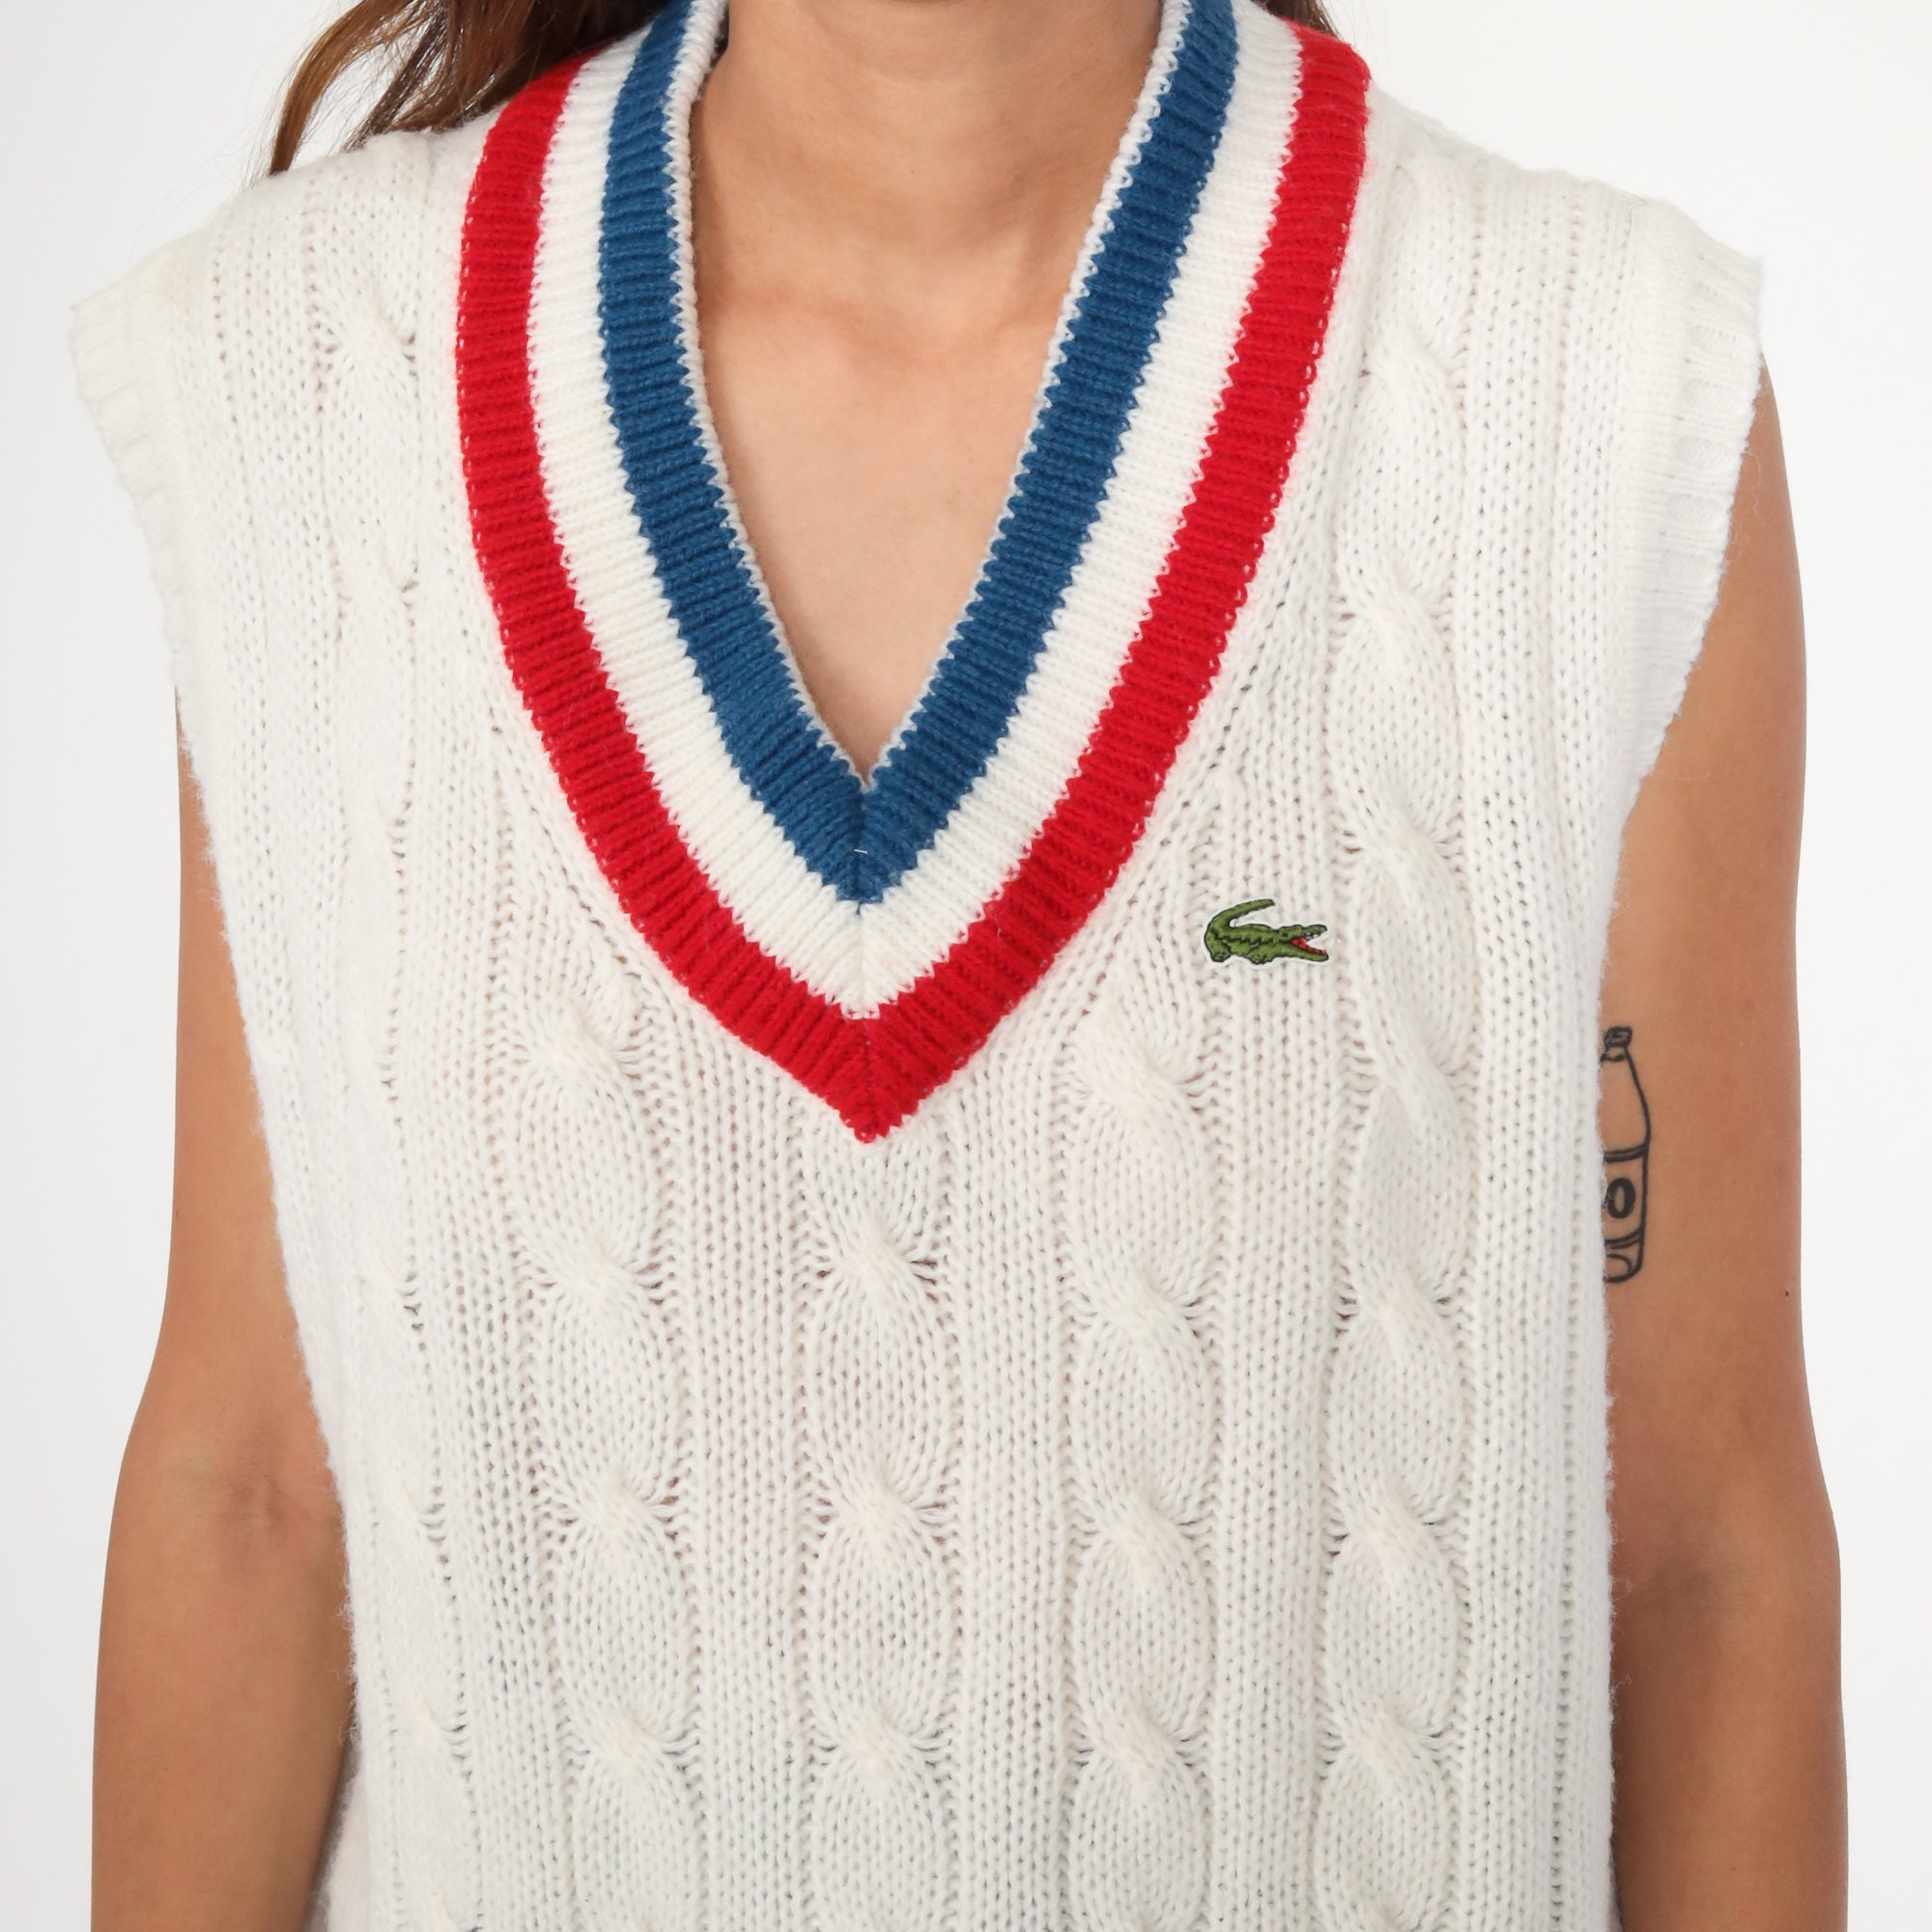 70s Lacoste Sweater Vest Top Tennis Vest Top White Knit Retro Cable Knit Sleeveless Sweater Acrylic Red Blue V Neck 80s Medium Large